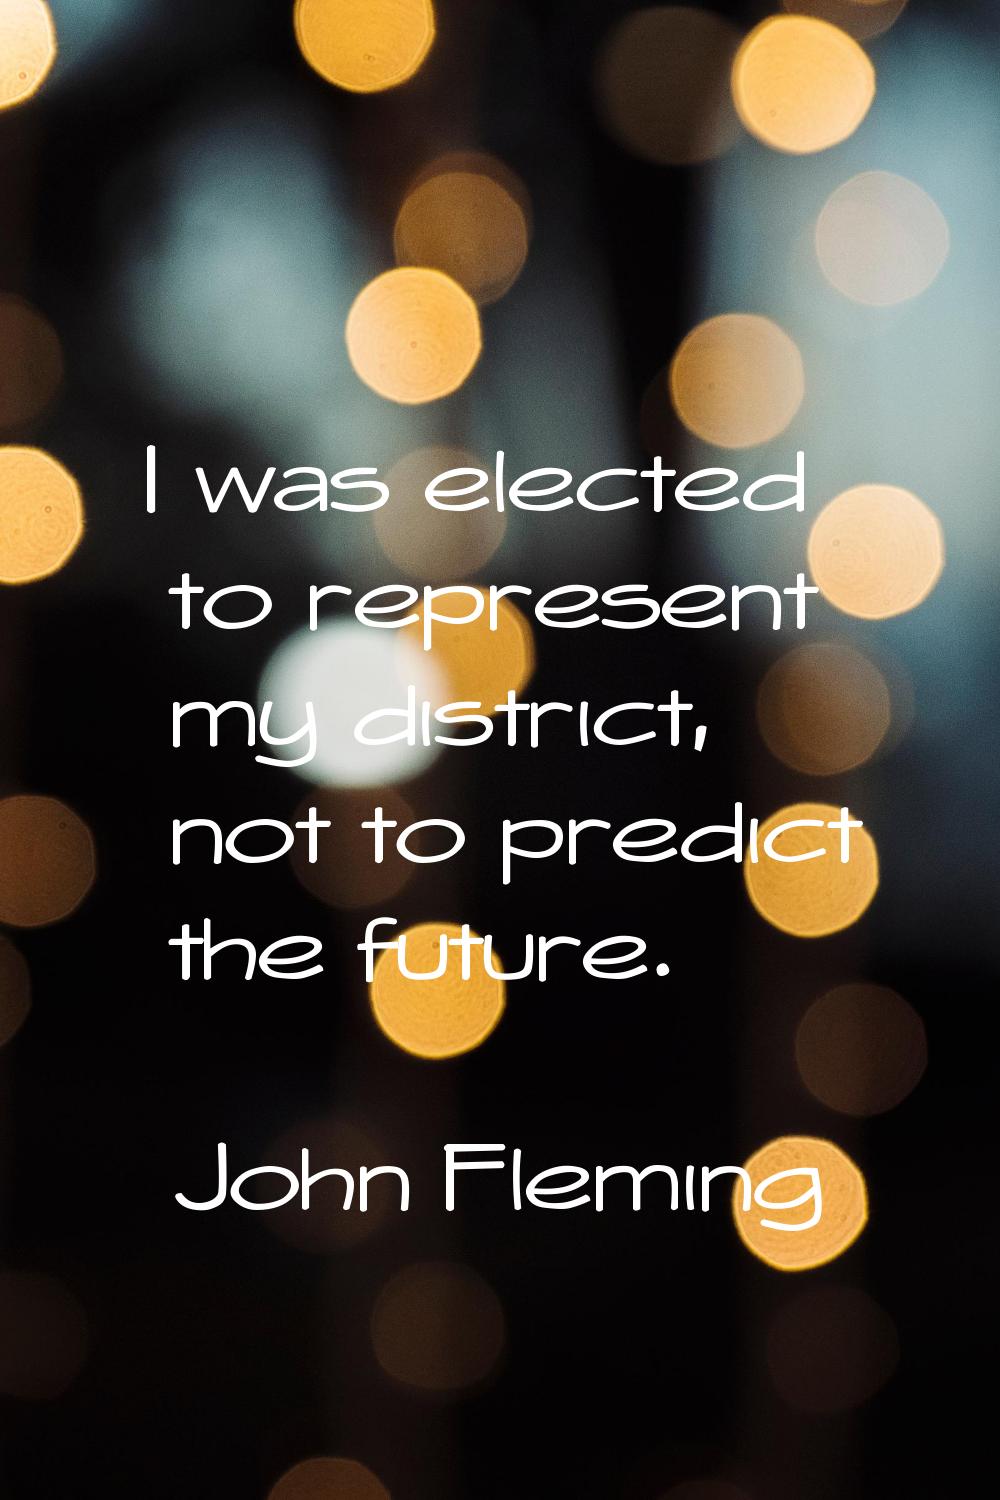 I was elected to represent my district, not to predict the future.